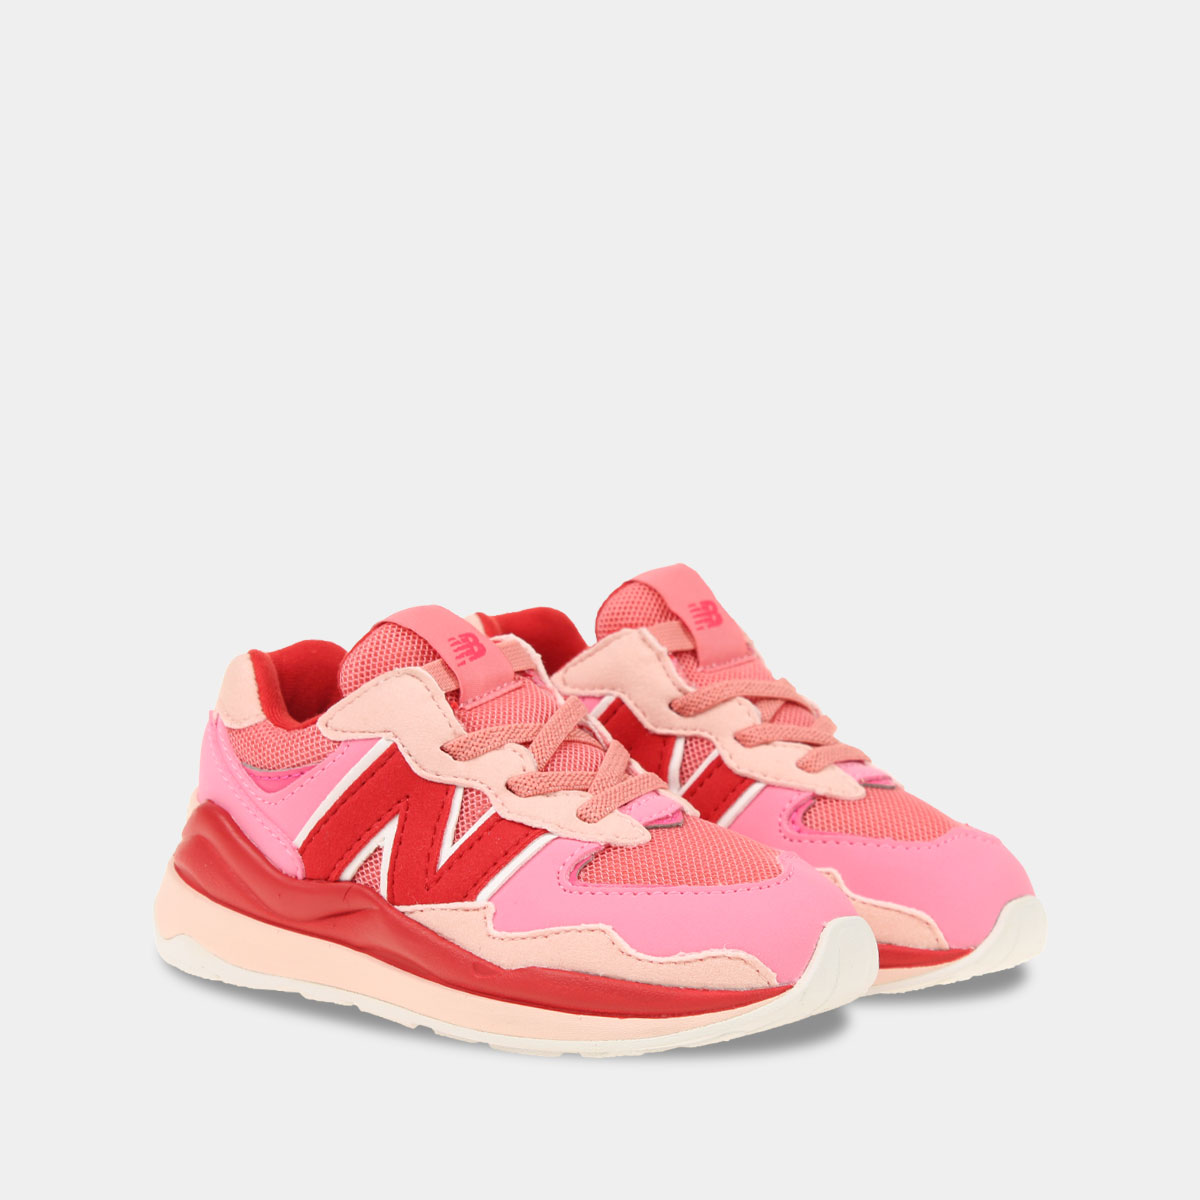 New Balance 5740 Rood/Roze Peuters